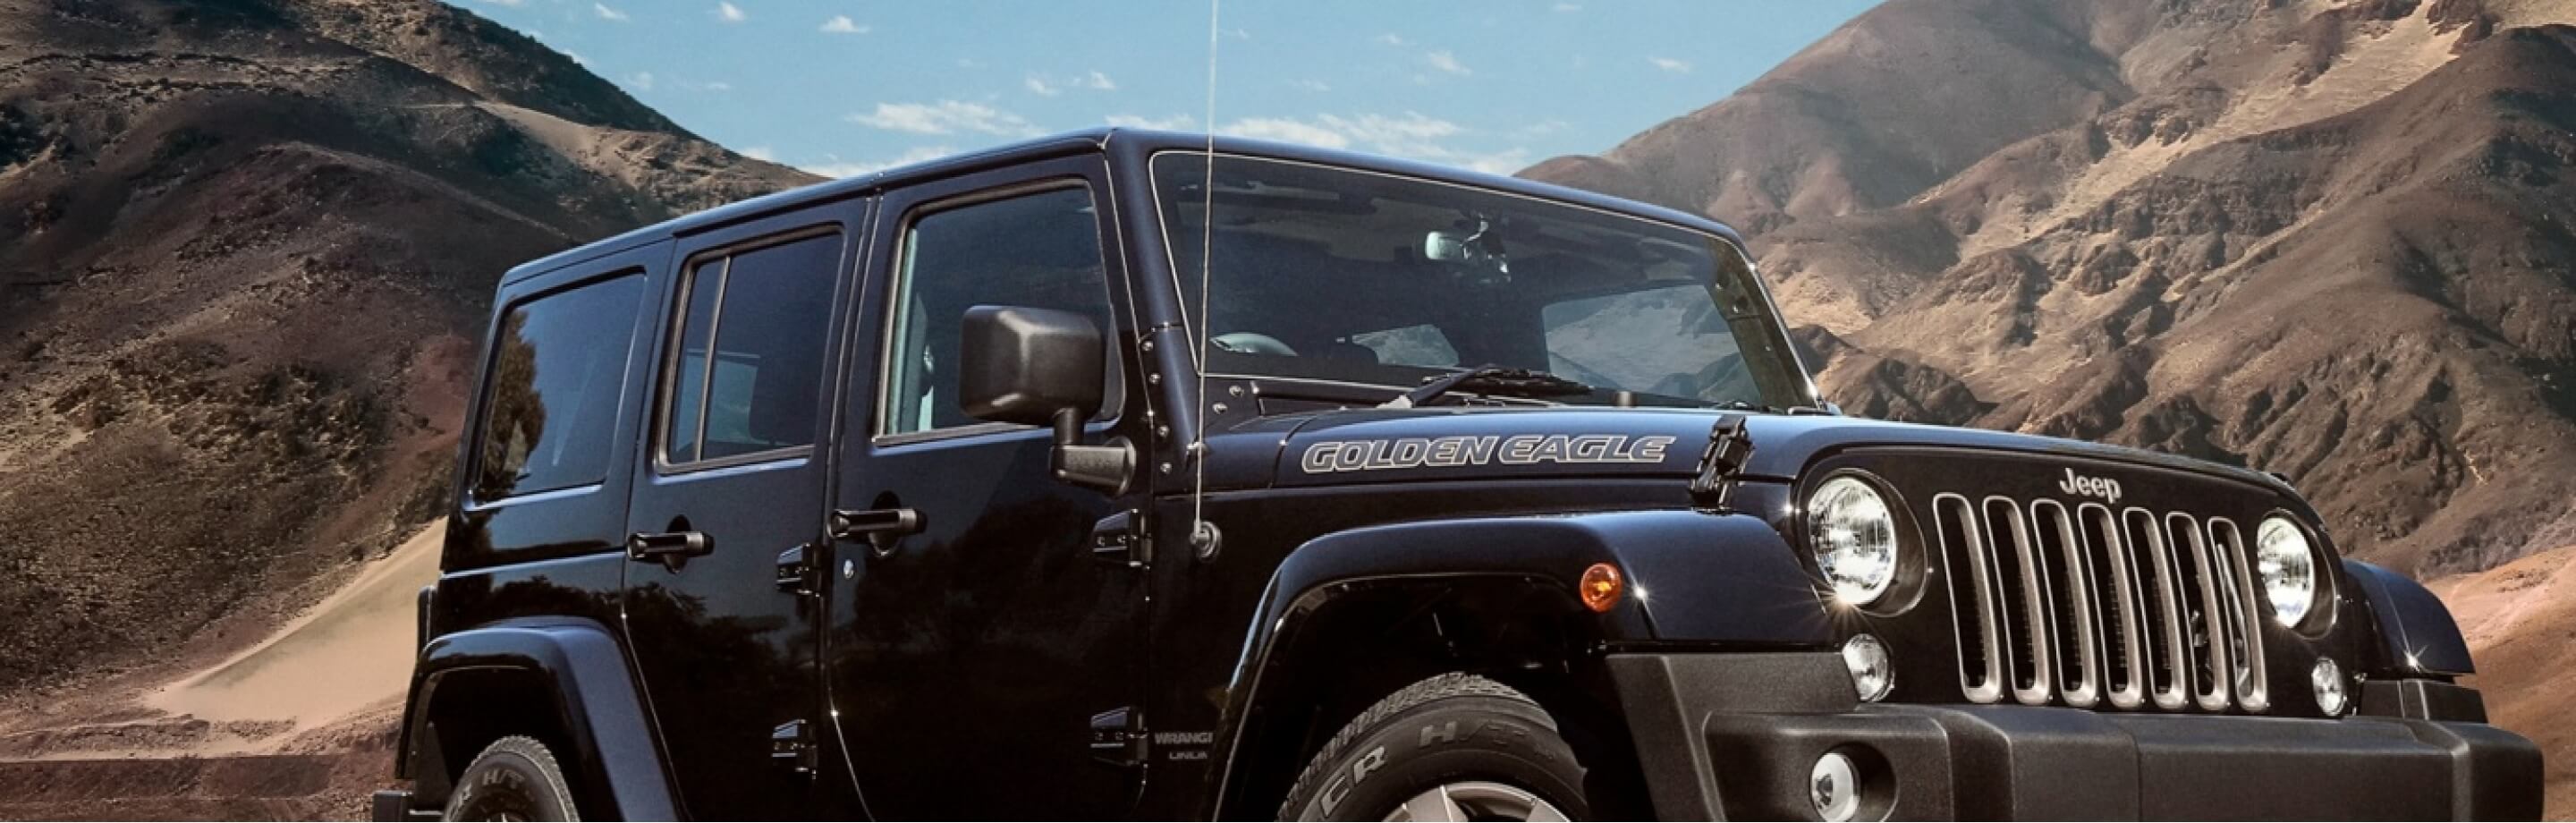 The Jeep Golden Eagle Lands in New Zealand 